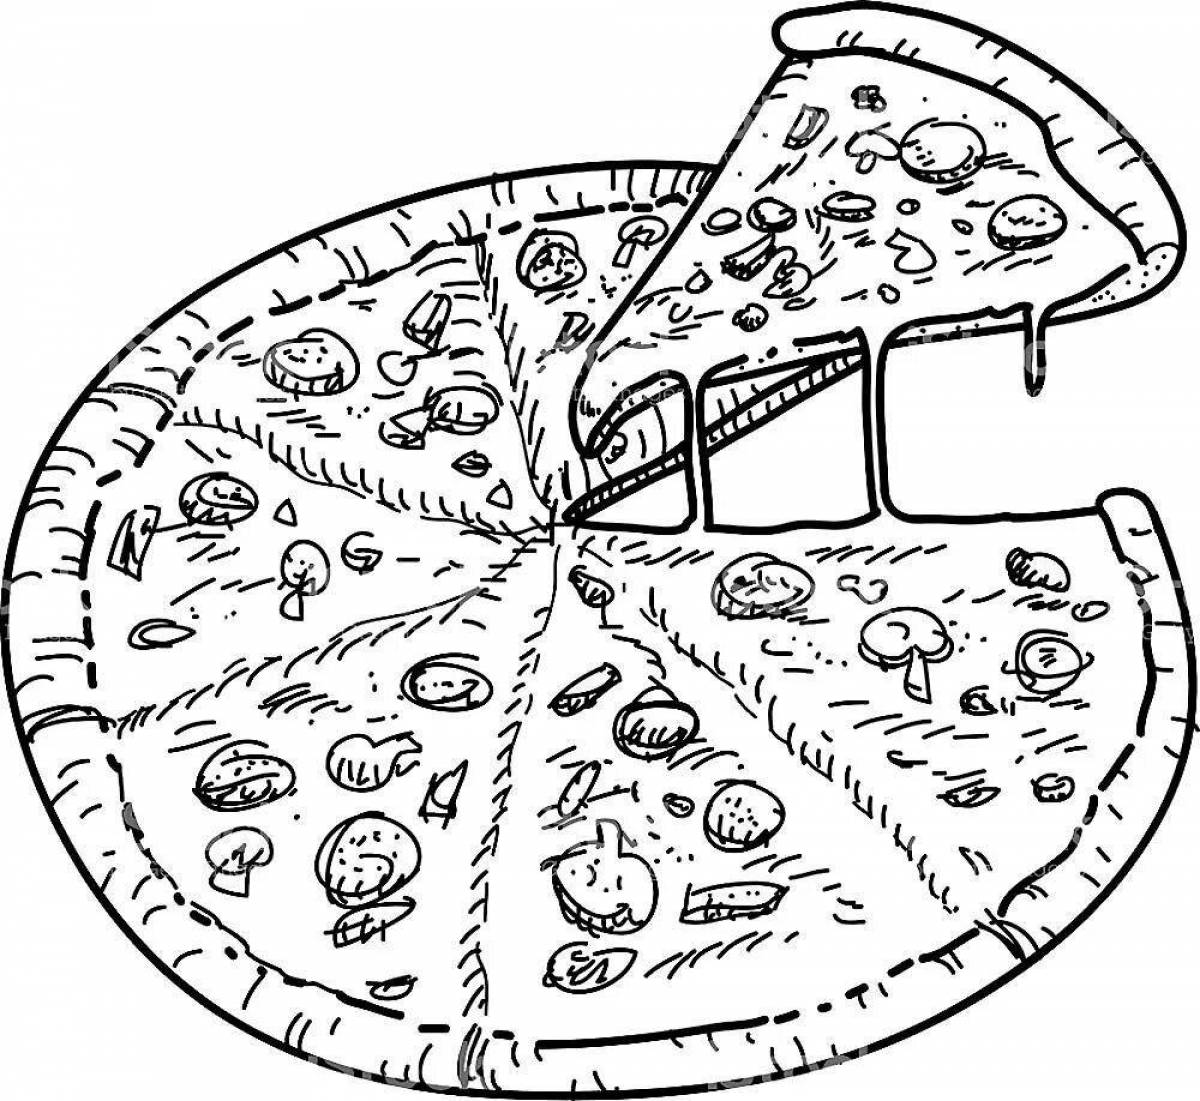 Teasing pizza drawing